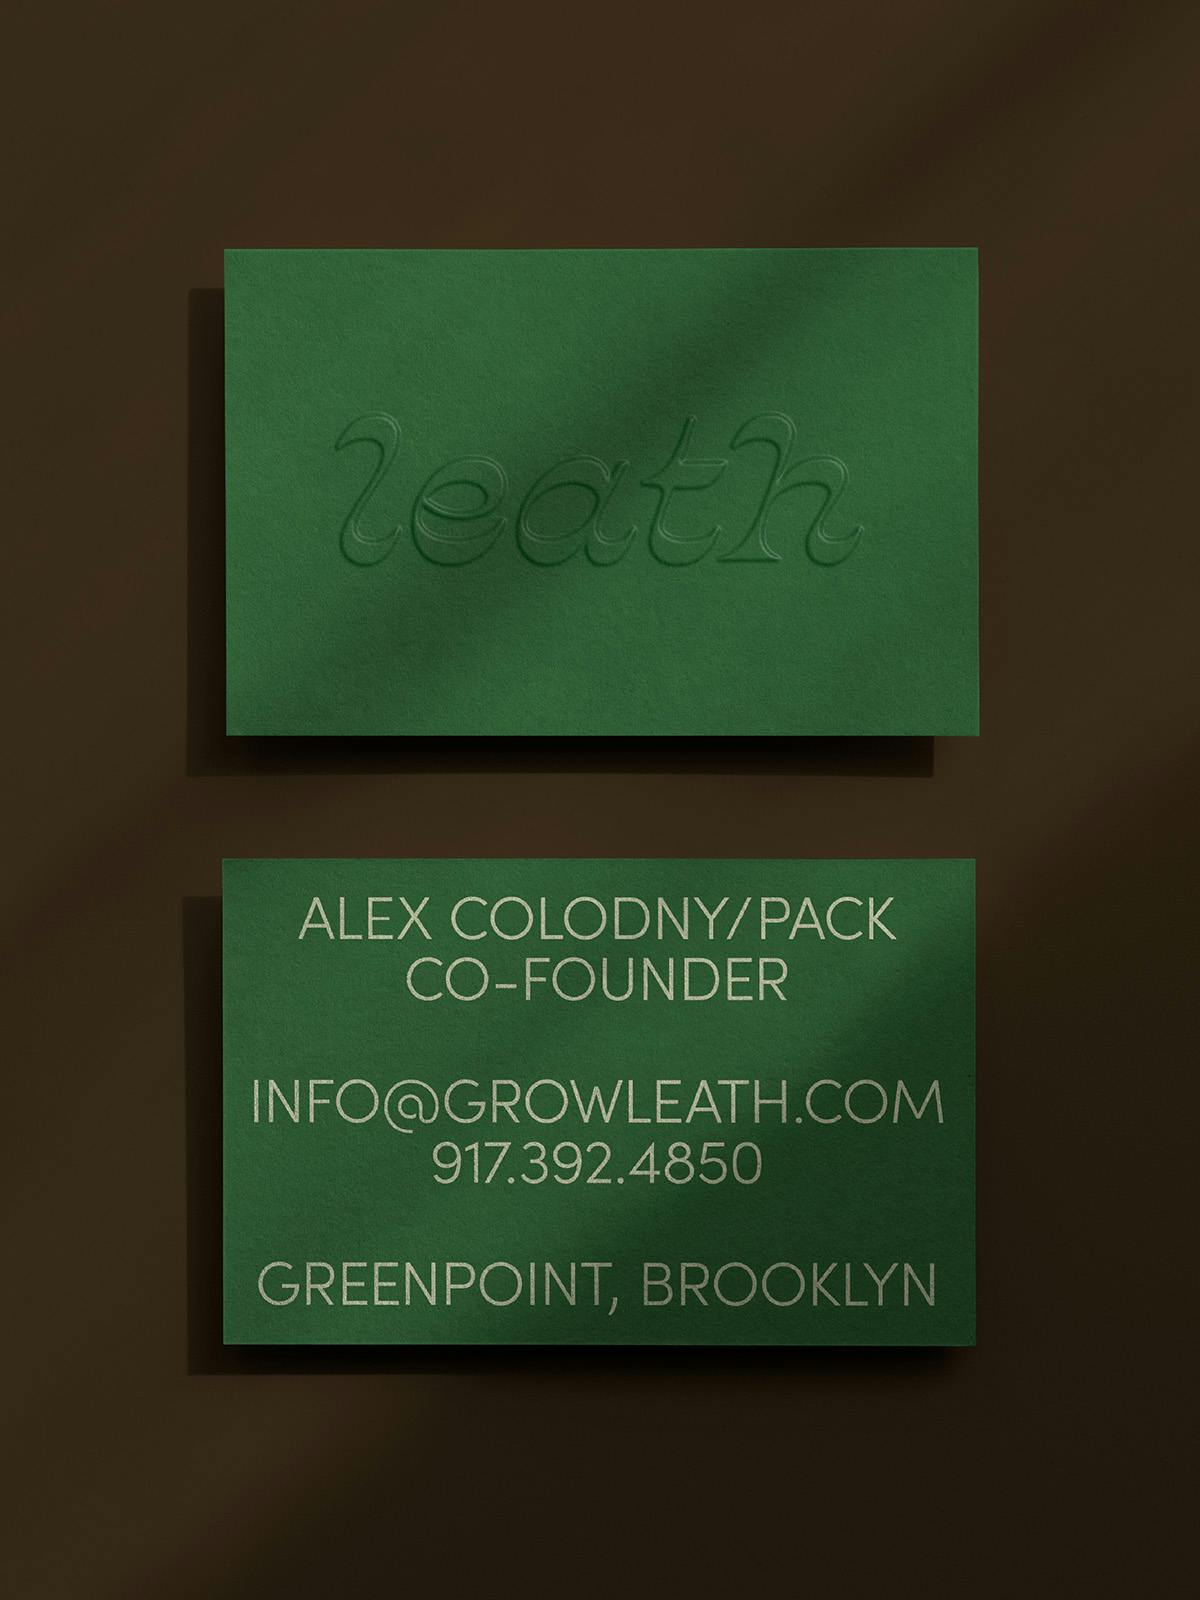 Image showing the branding for Leath, as seen on dark green business cards with the brand name inscribed in elaborate lettering on the top card, and contact details for co-founder Alex Colodny on the bottom card